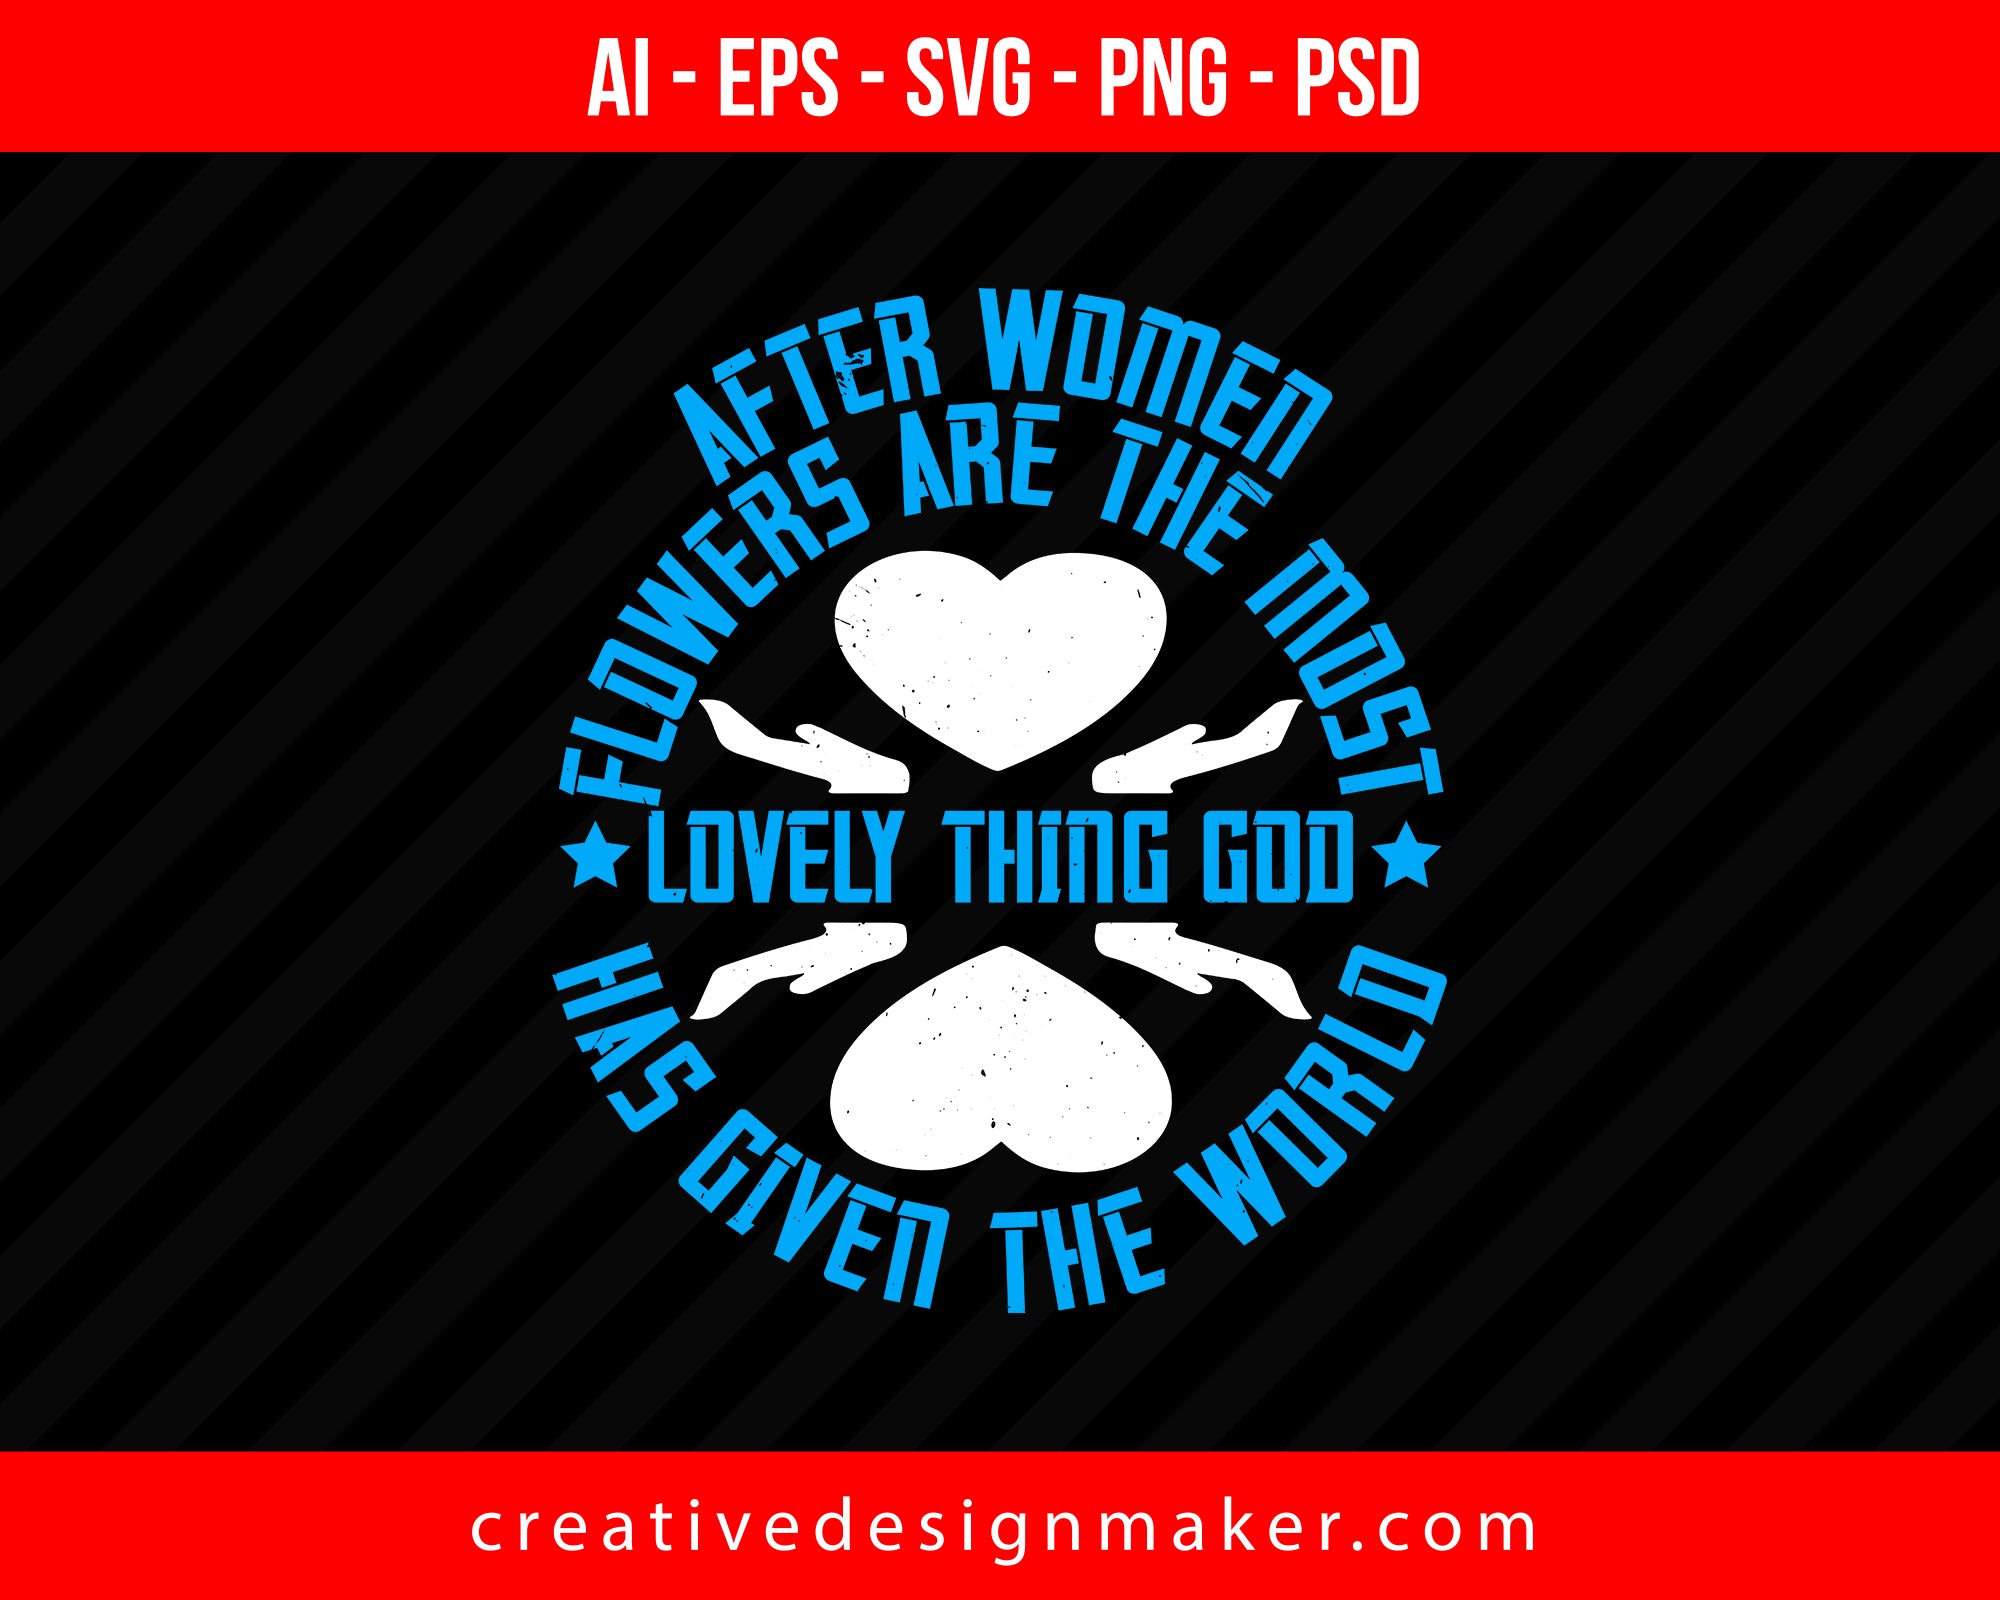 After women, flowers are the most lovely thing God has given the world Print Ready Editable T-Shirt SVG Design!